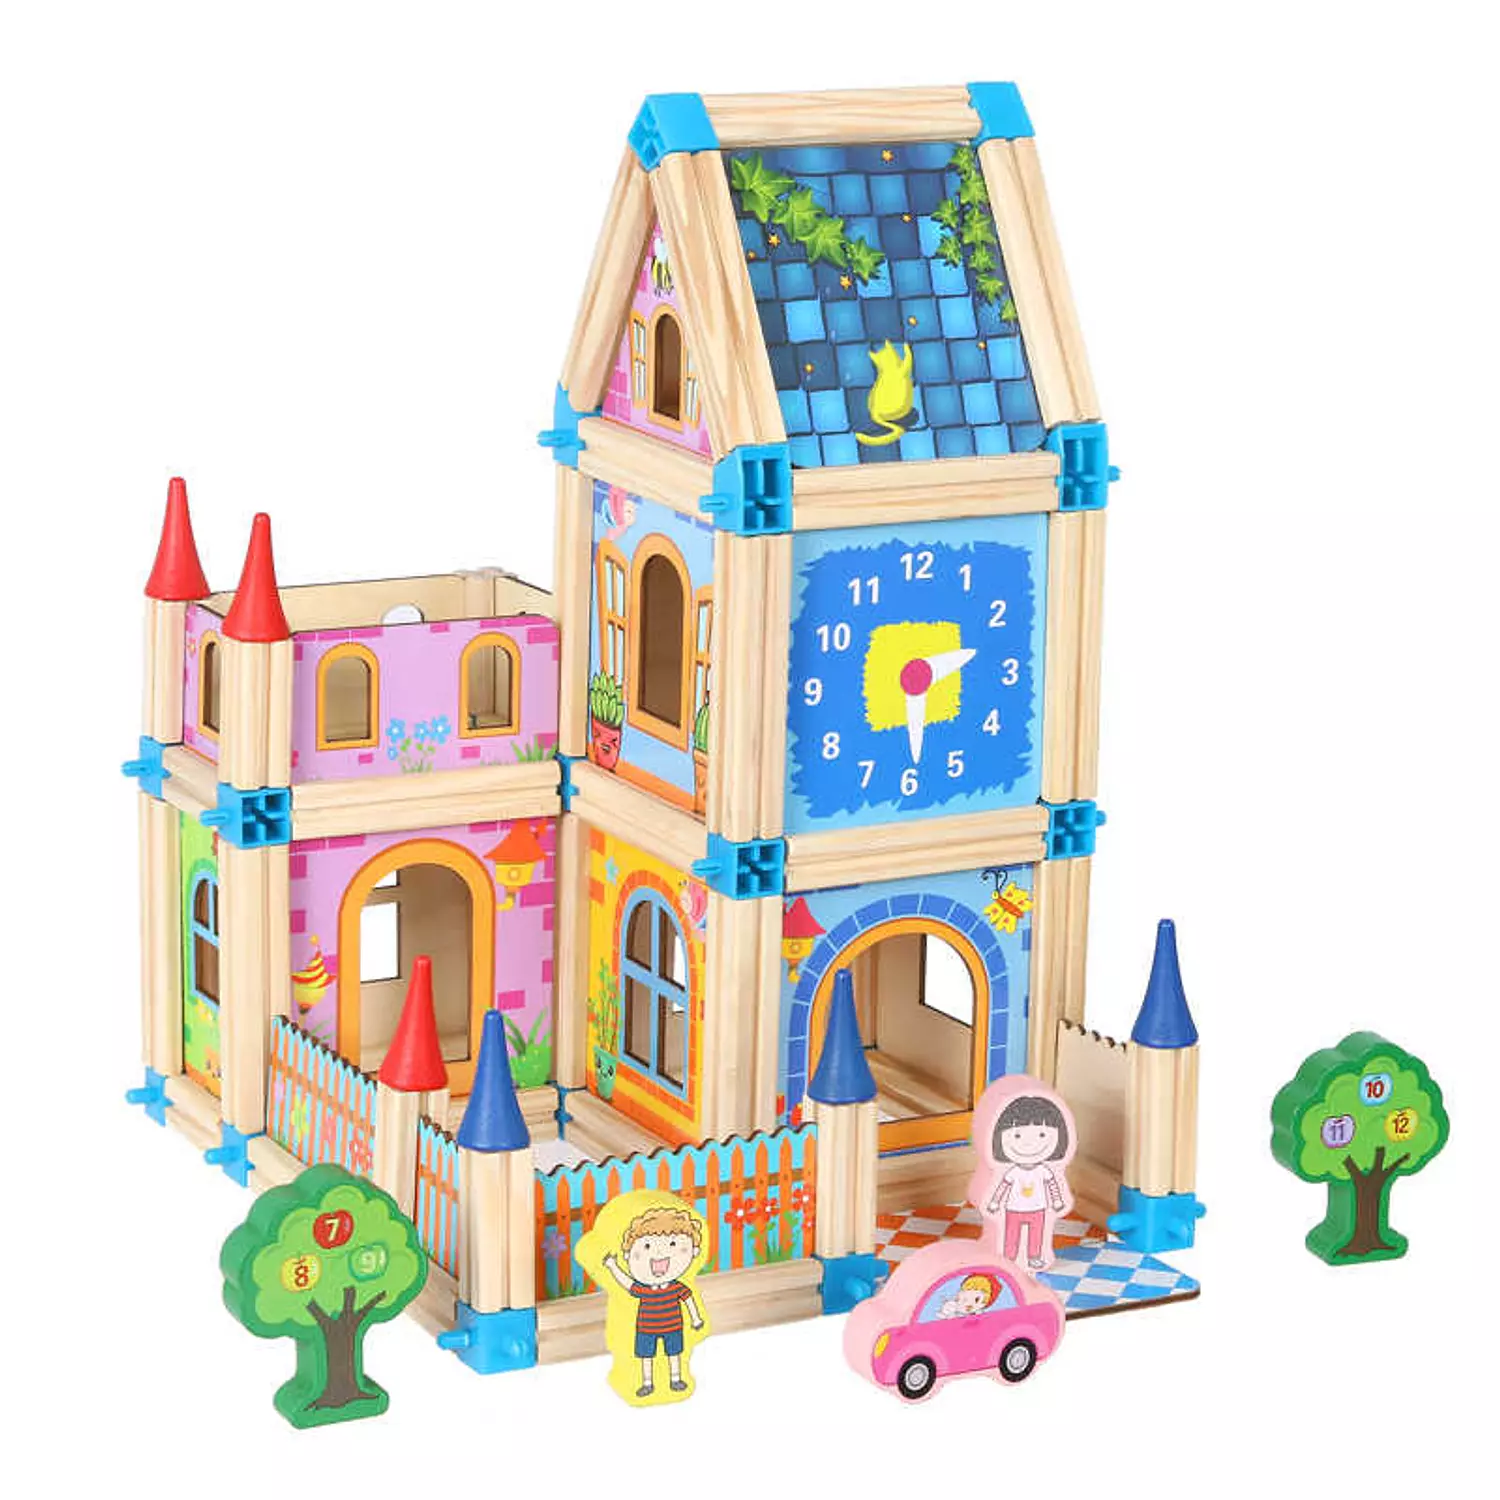 Master of Architecture Building Blocks Toy 0